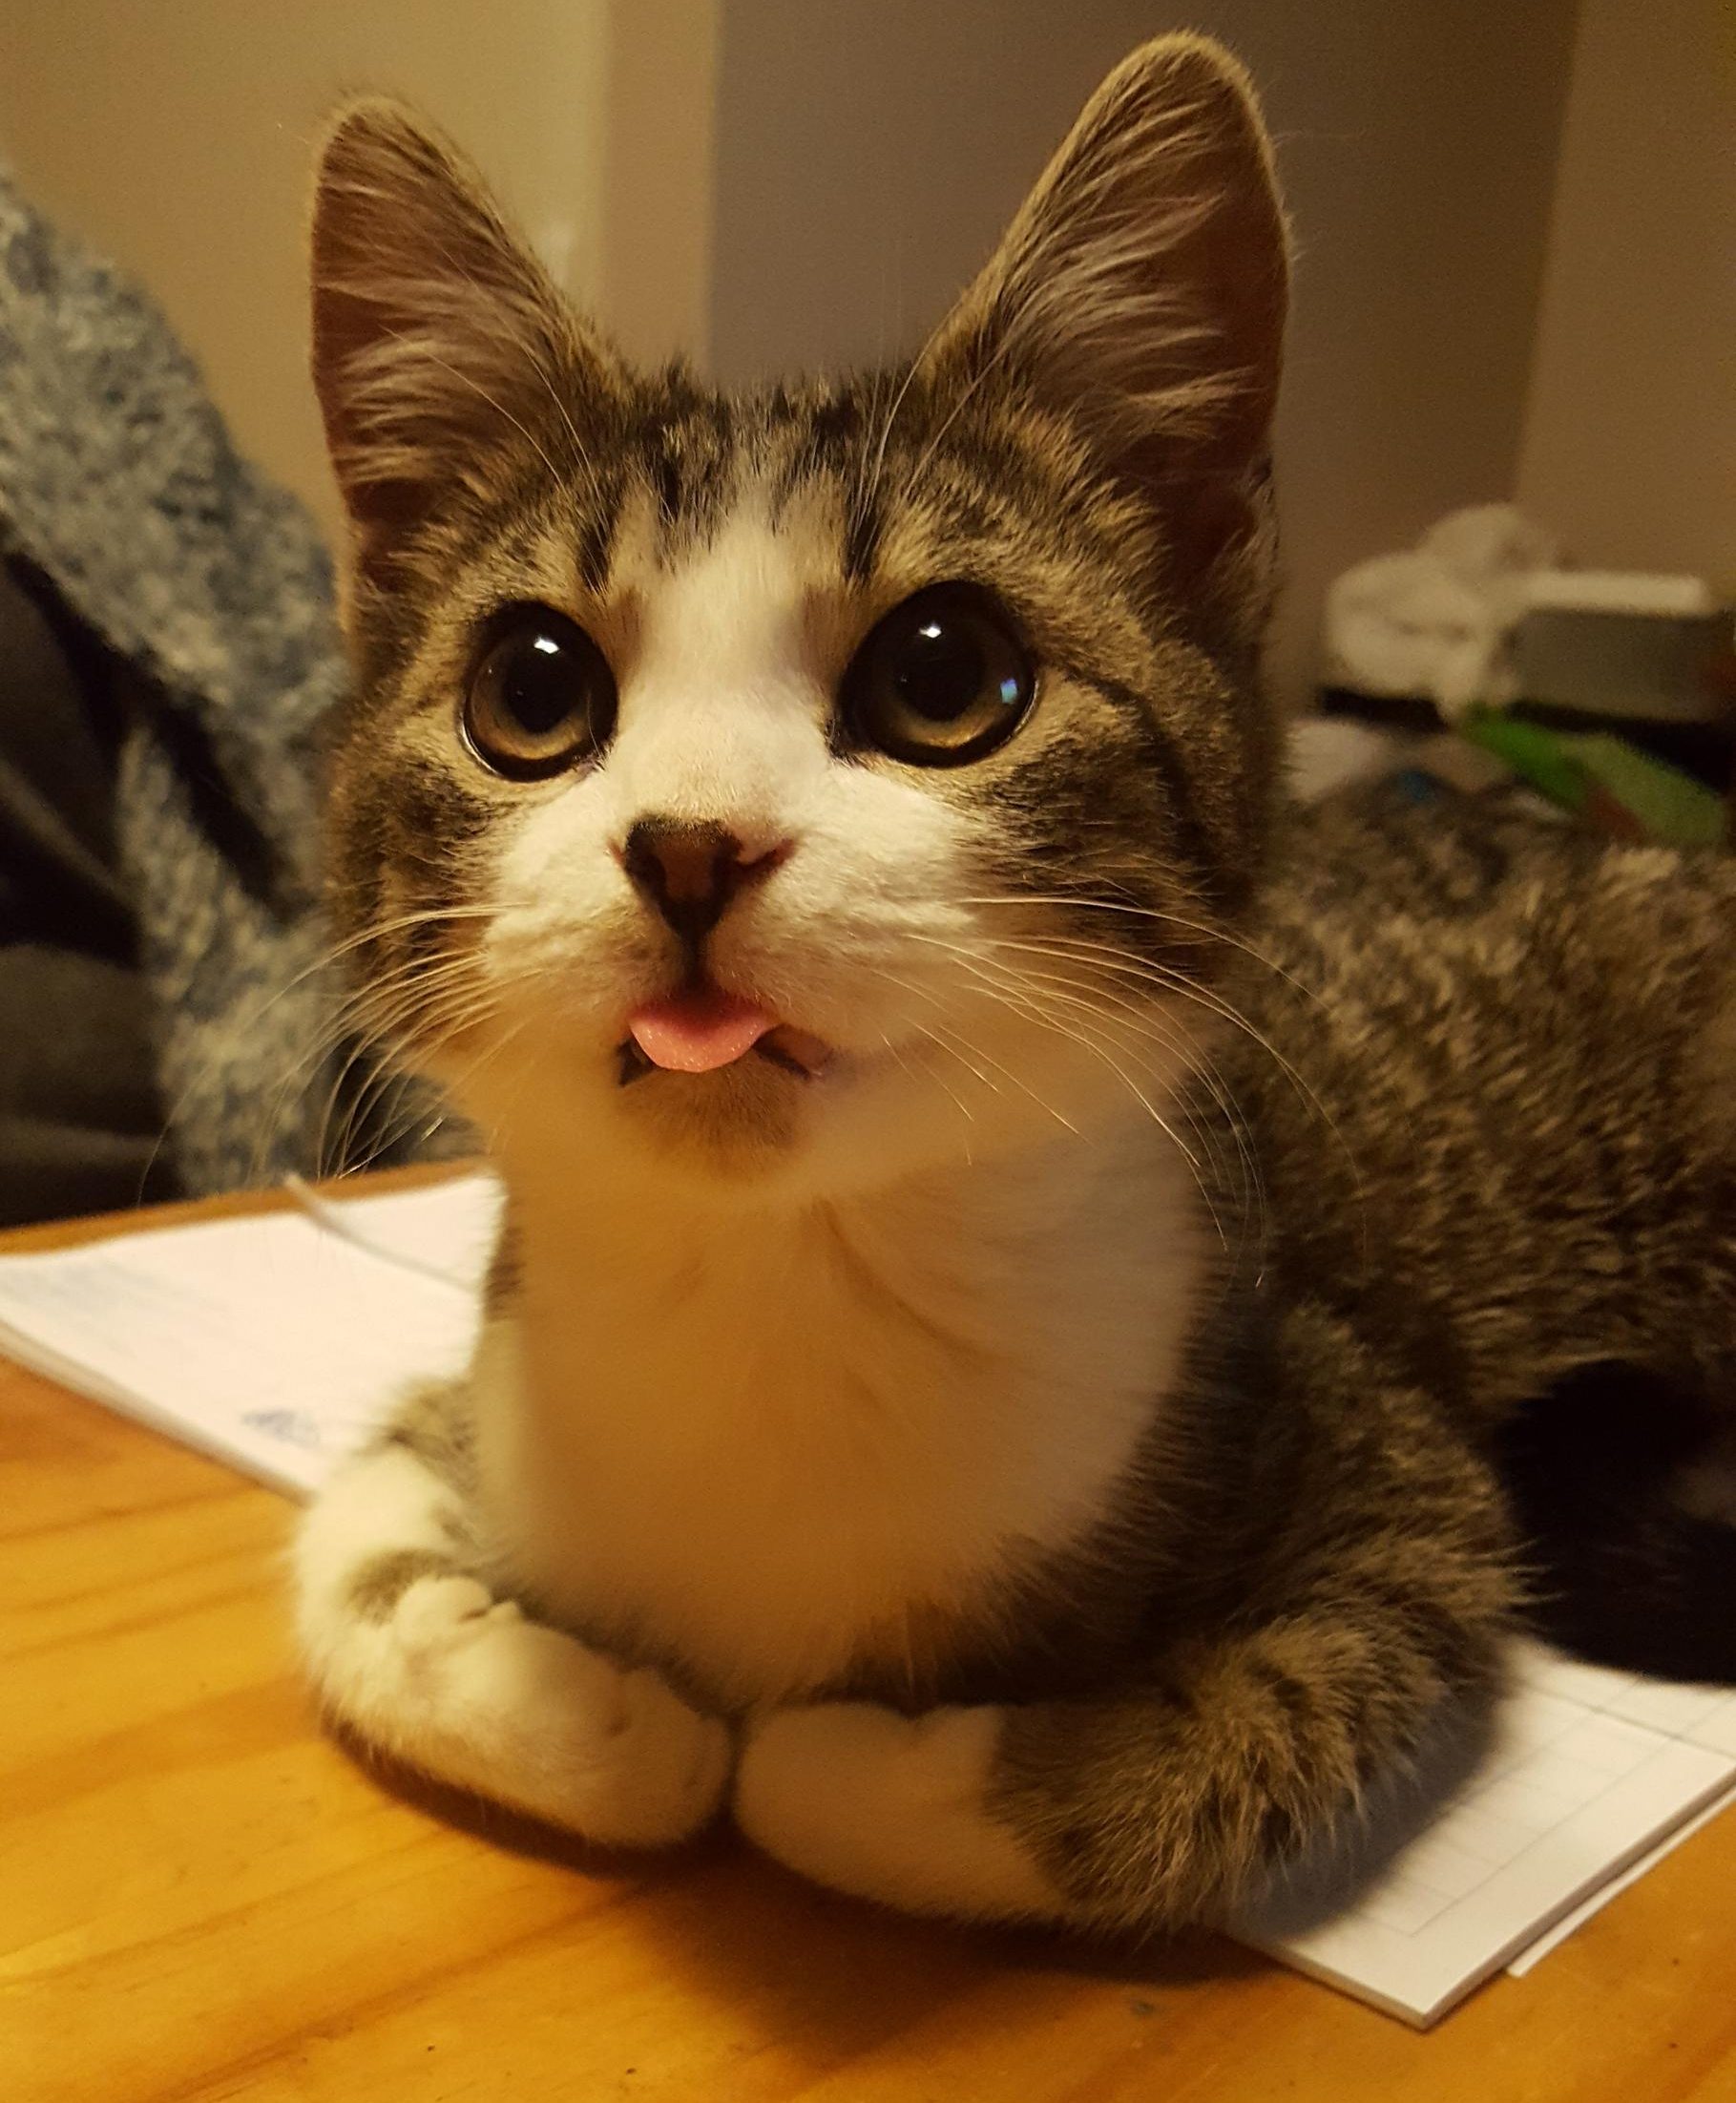 cat sticking tongue out sick